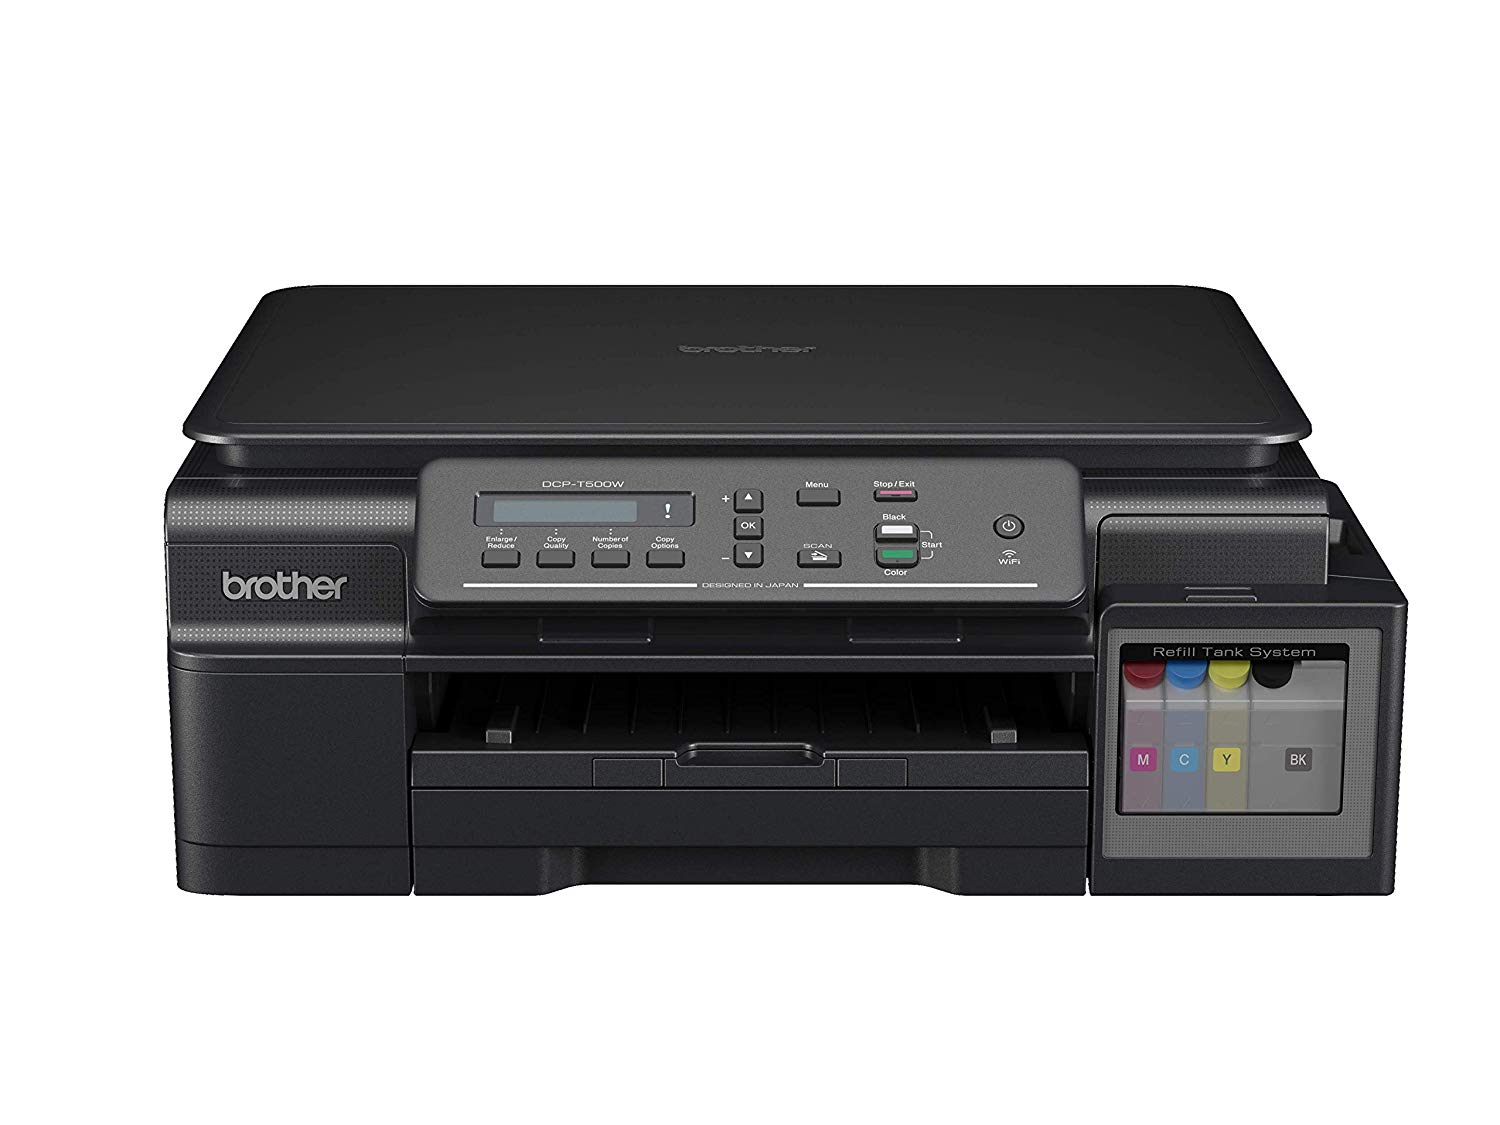 Brother DCP-T500W All-in-One Wireless Ink Tank Colour Printer/All-in-One (Print, Scan, Copy, Fax)/Connectivity - Wi-Fi, USB